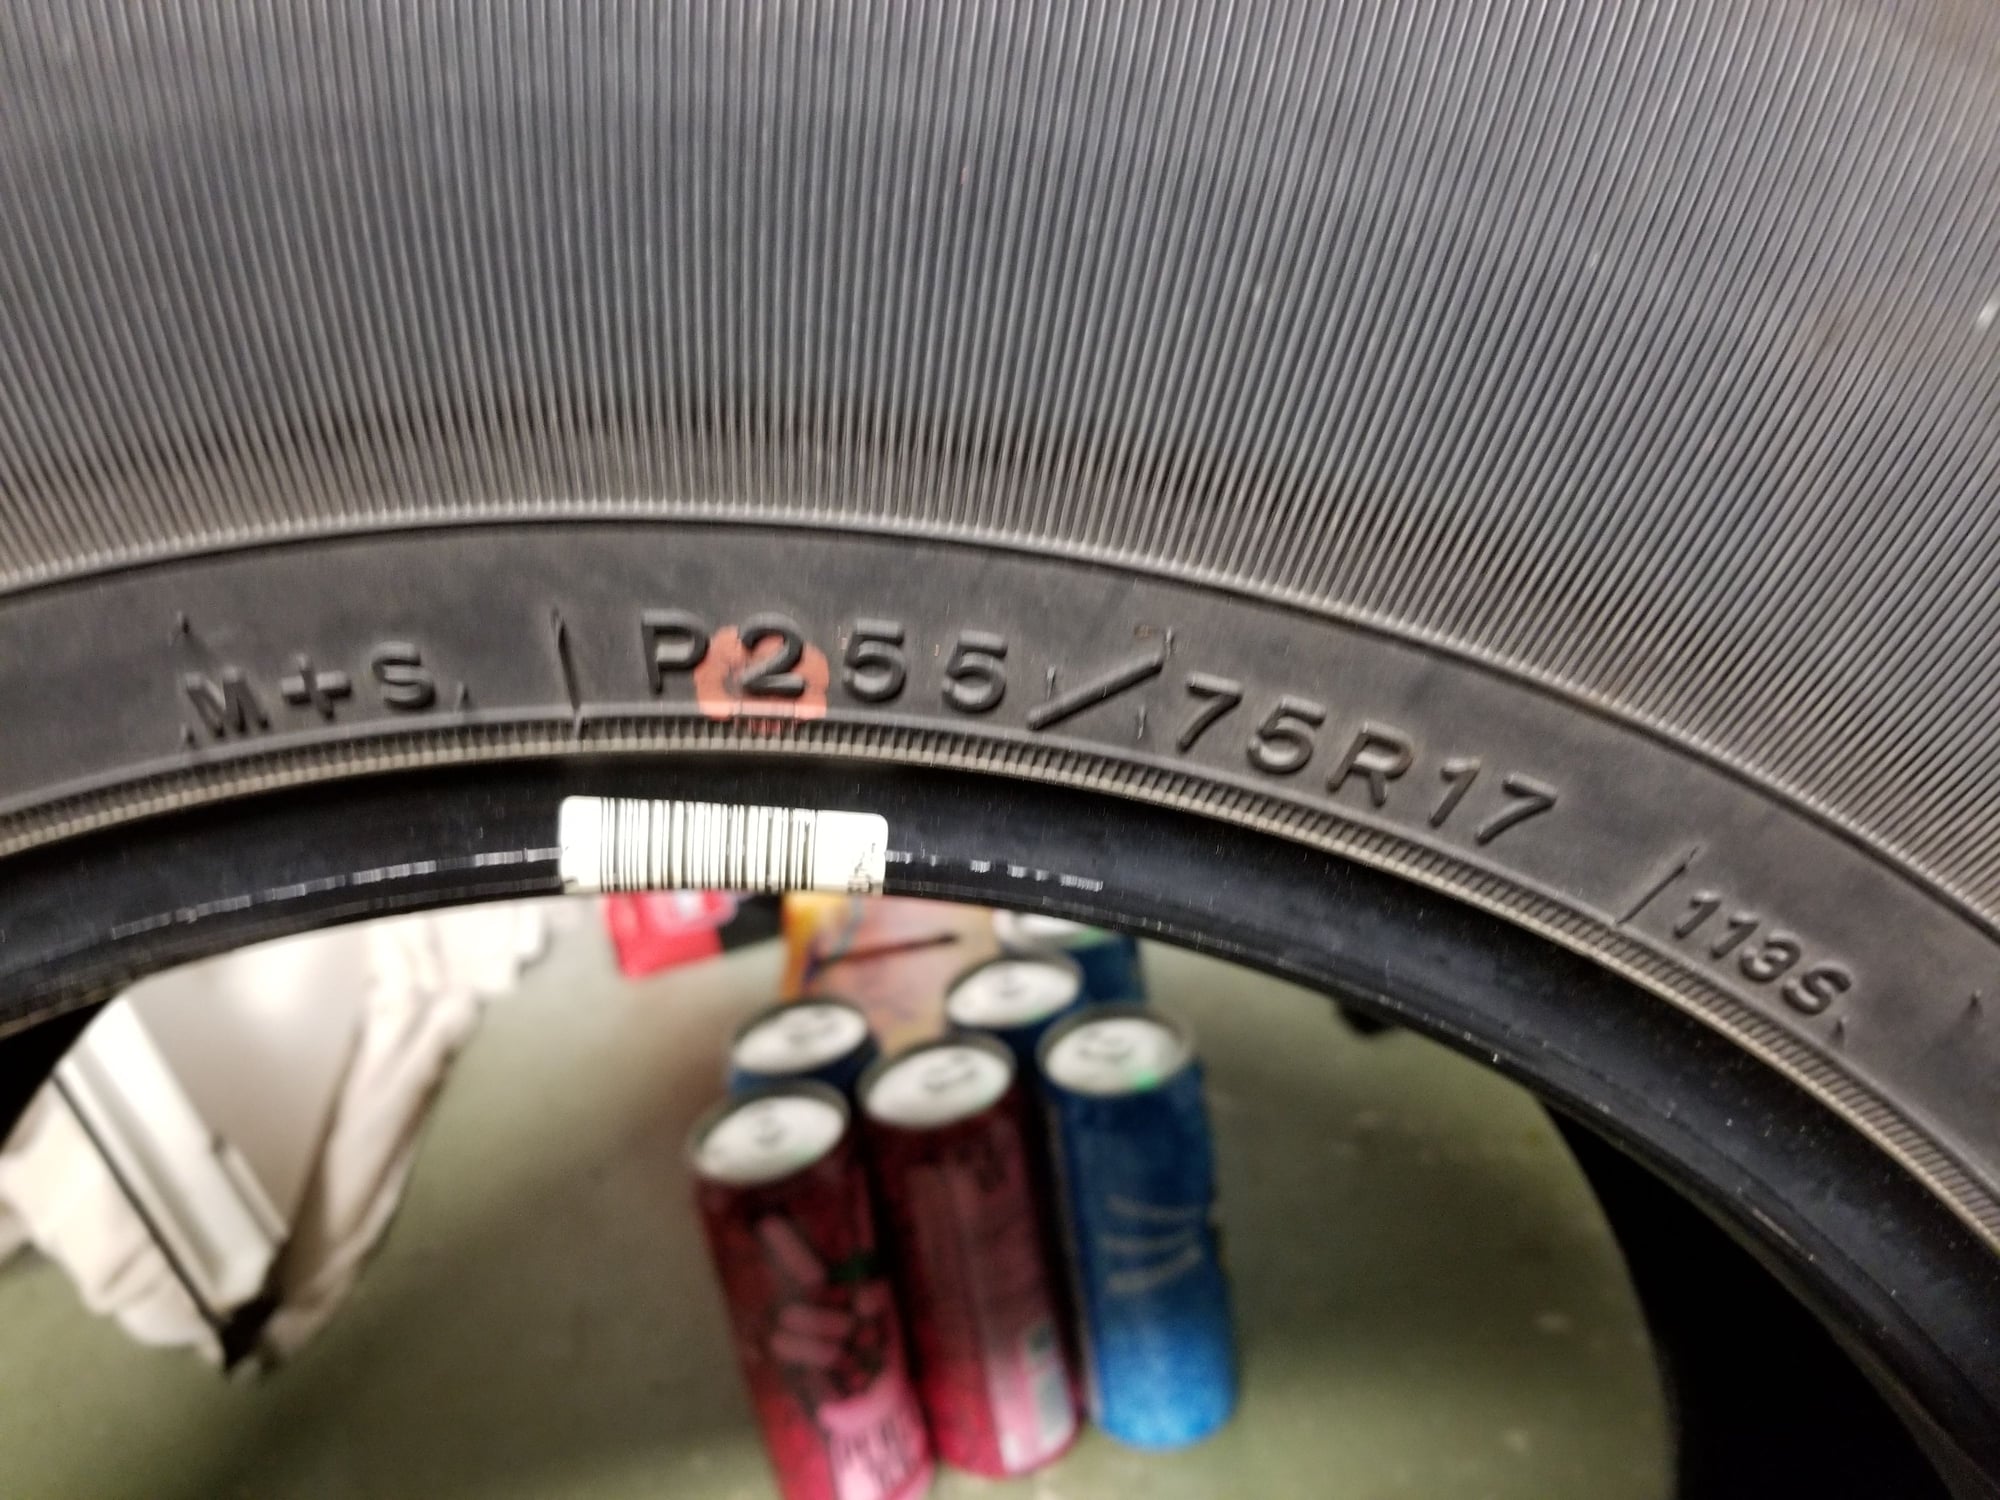 Wheels and Tires/Axles - FS - Goodyear Wrangler SR-A P255/75R17 tire - Used - Northville, MI 48167, United States